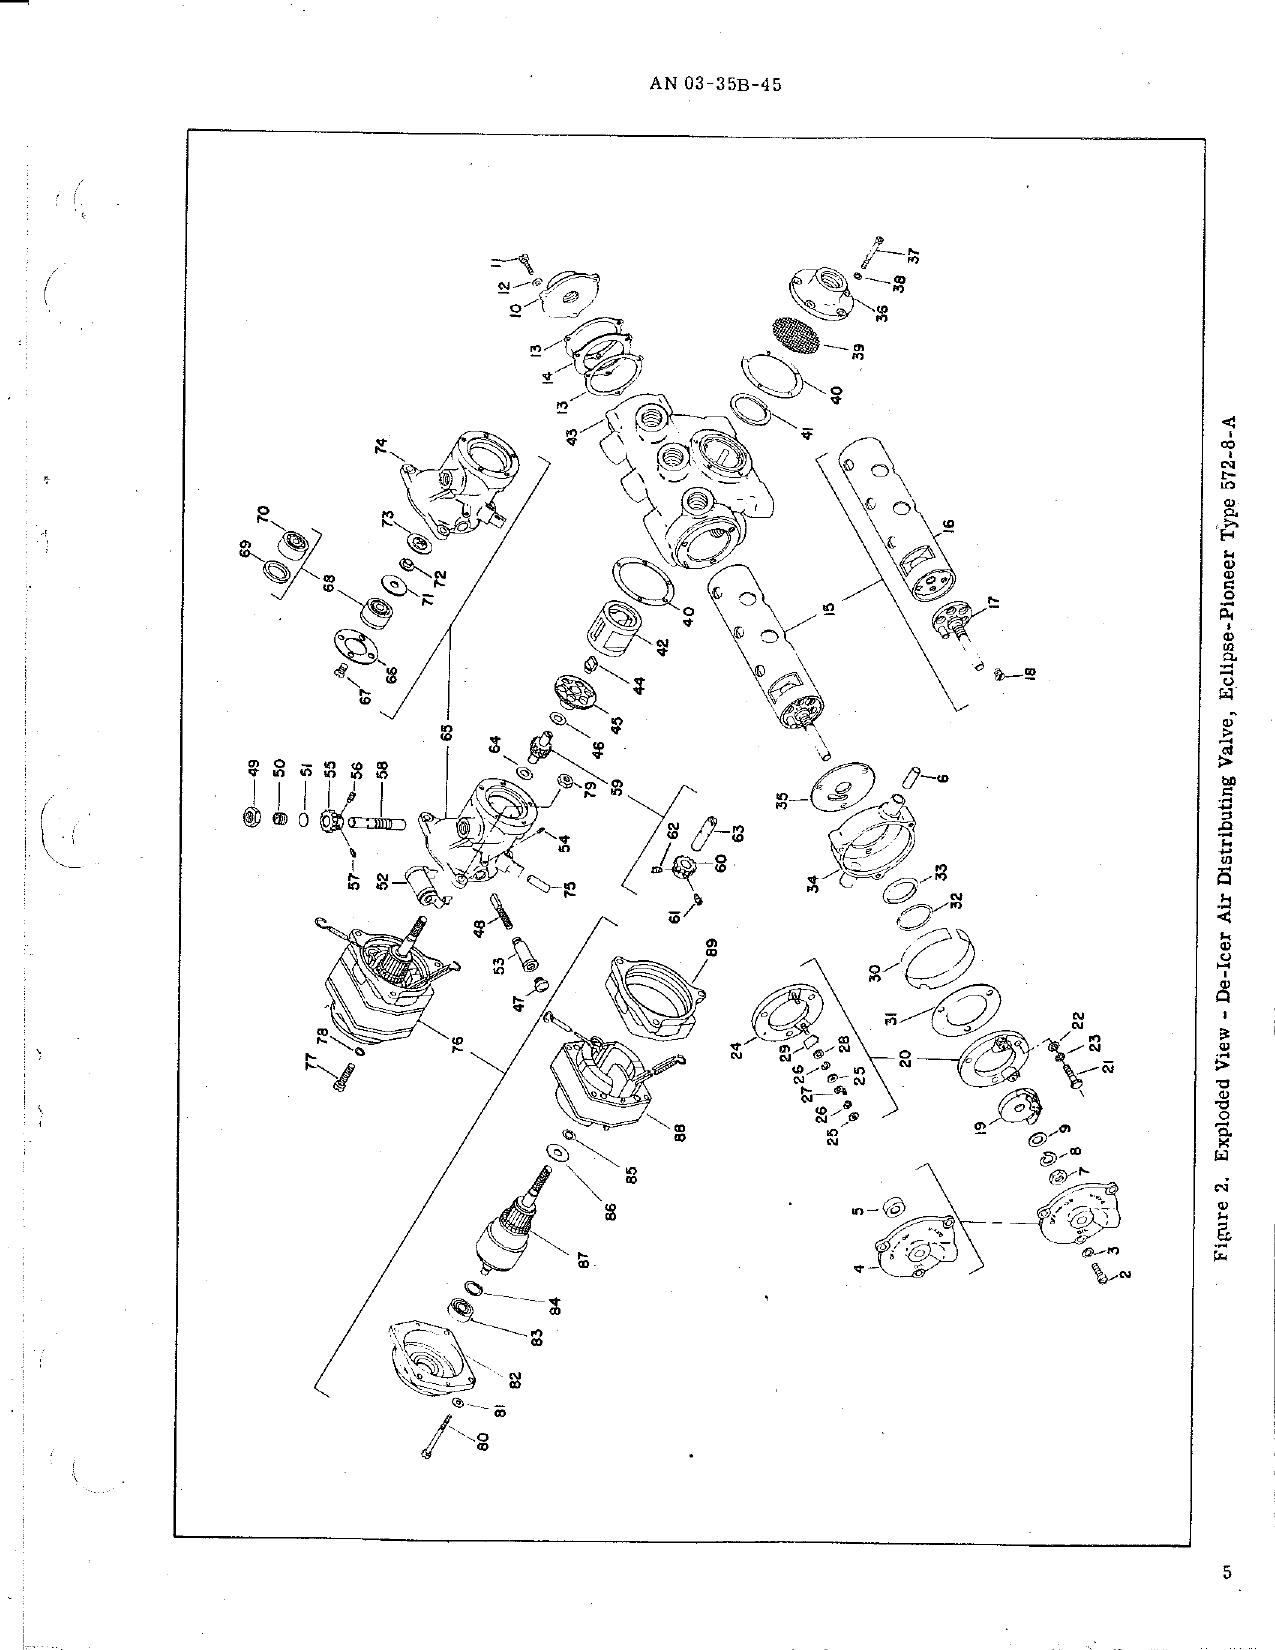 Sample page 5 from AirCorps Library document: Overhaul Instructions with Parts Breakdown for 5-Way Rotary De-Icer Air Distributing Valve - Type 572-8-A 